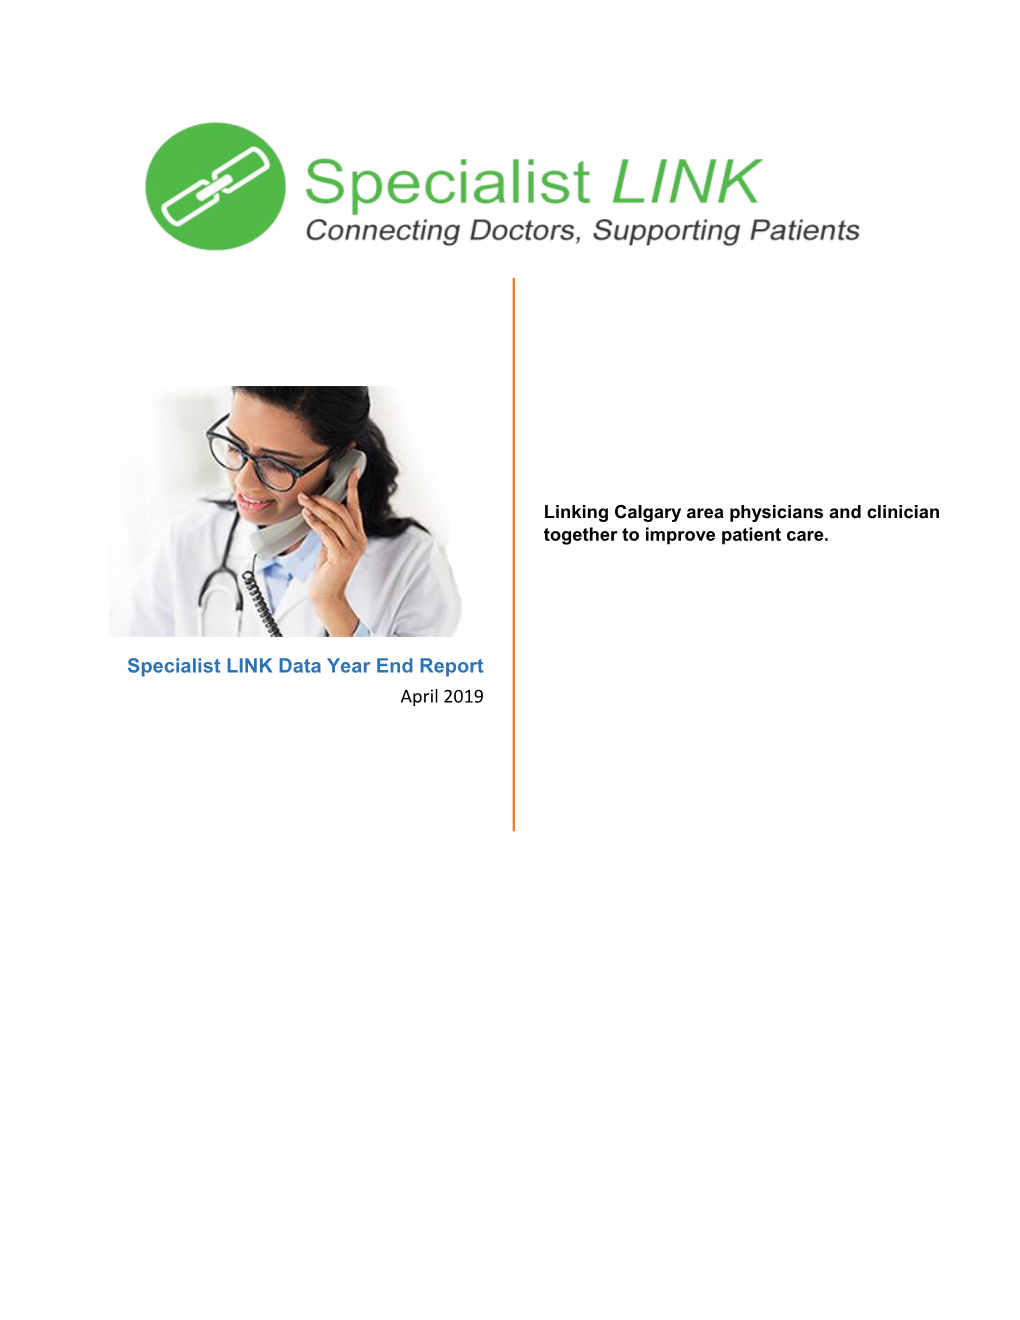 Specialist LINK Data Year End Report April 2019